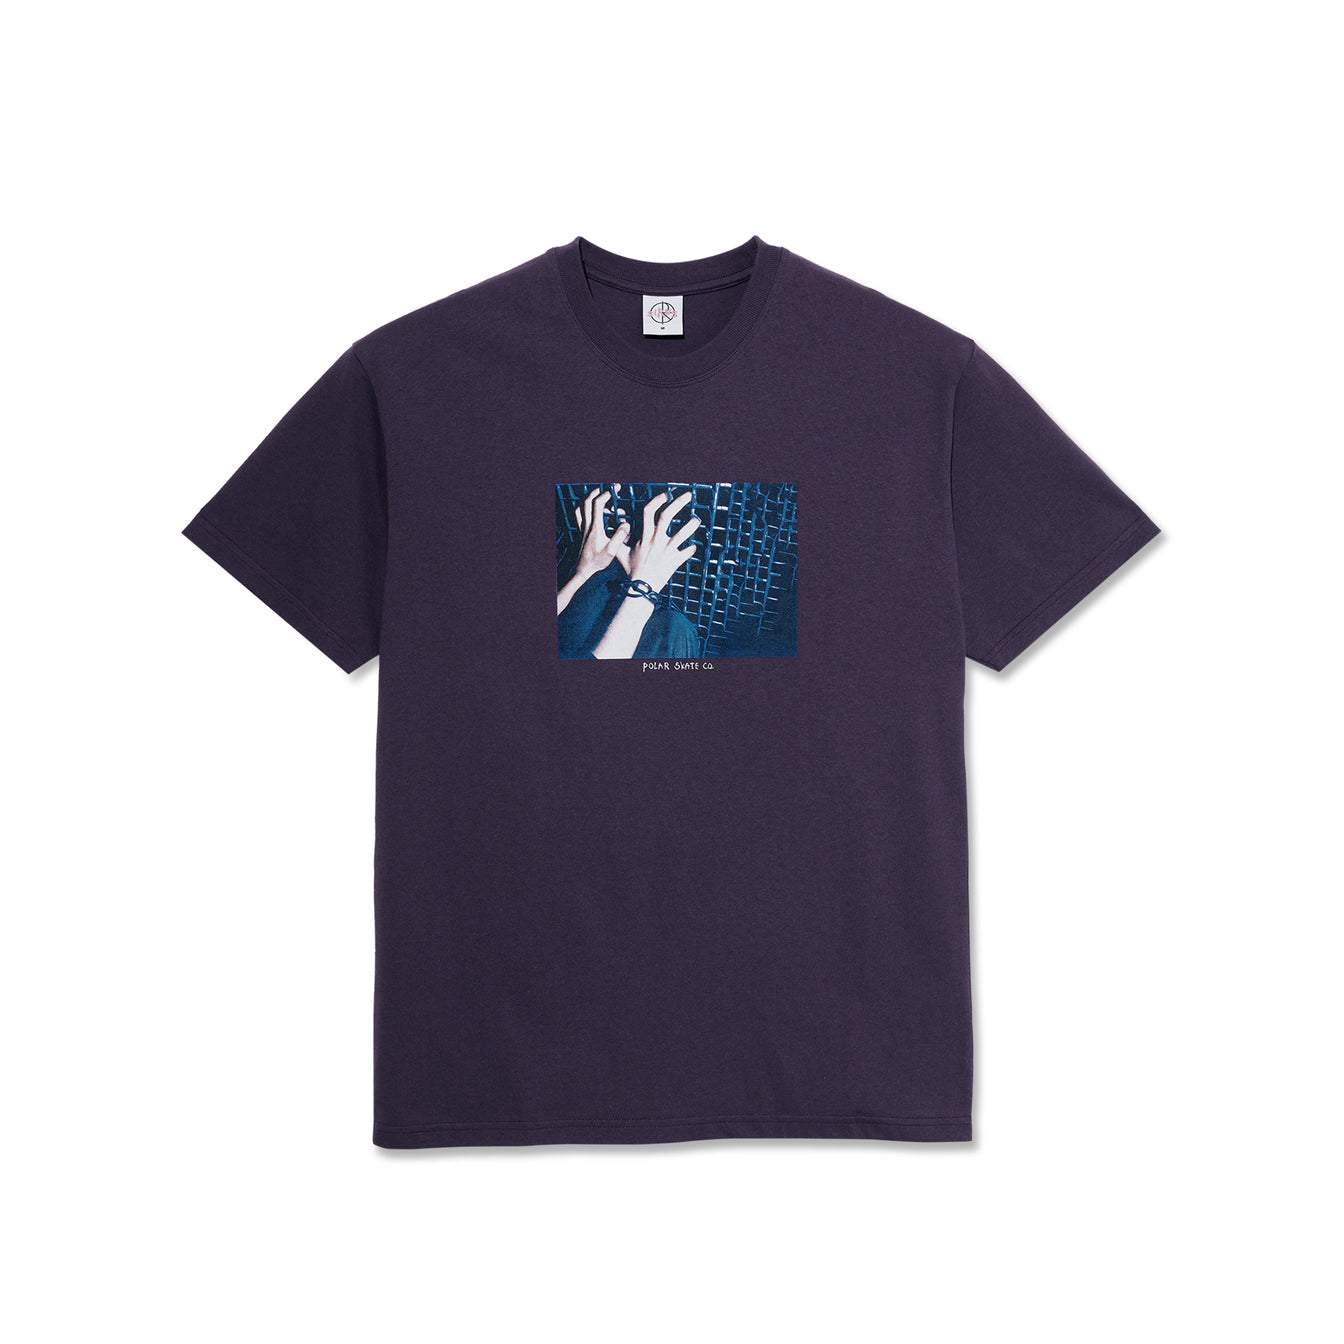 Caged Hands Tee